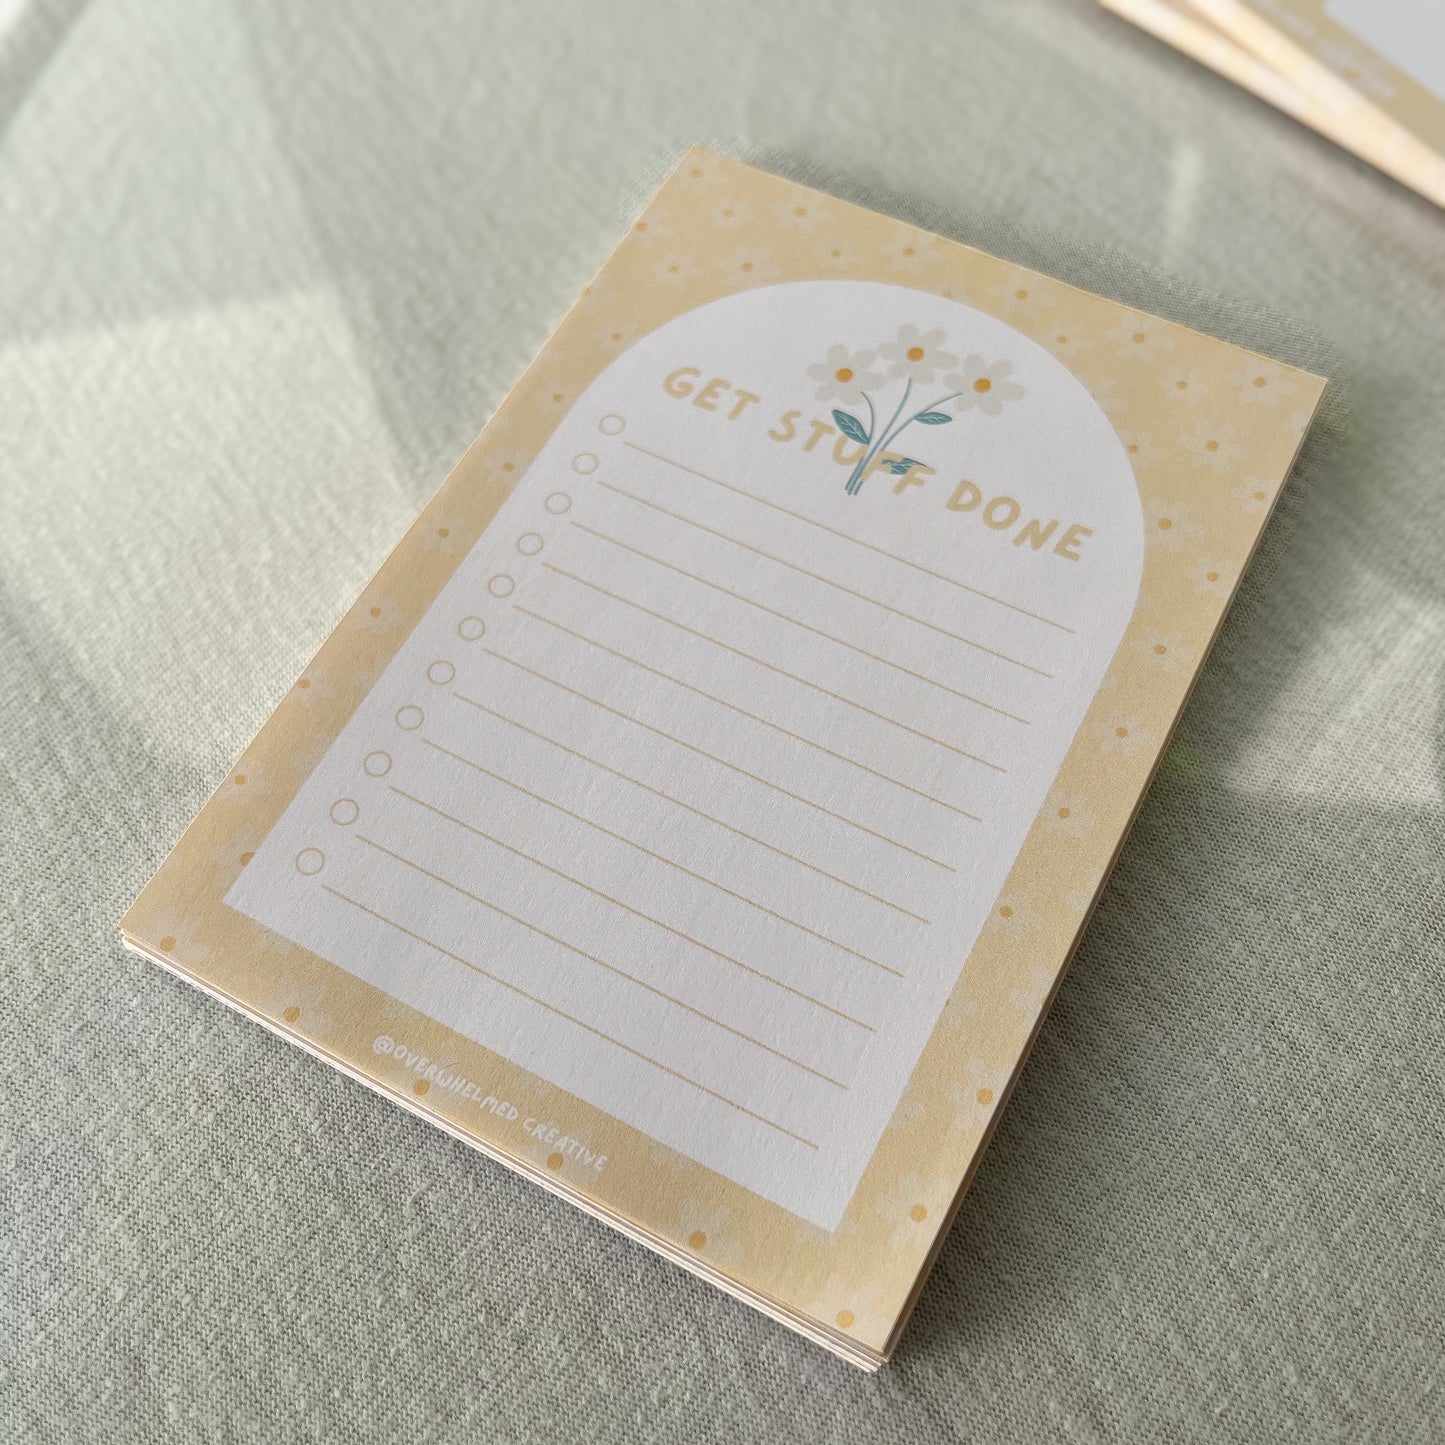 Spring Get Stuff Done Notepad